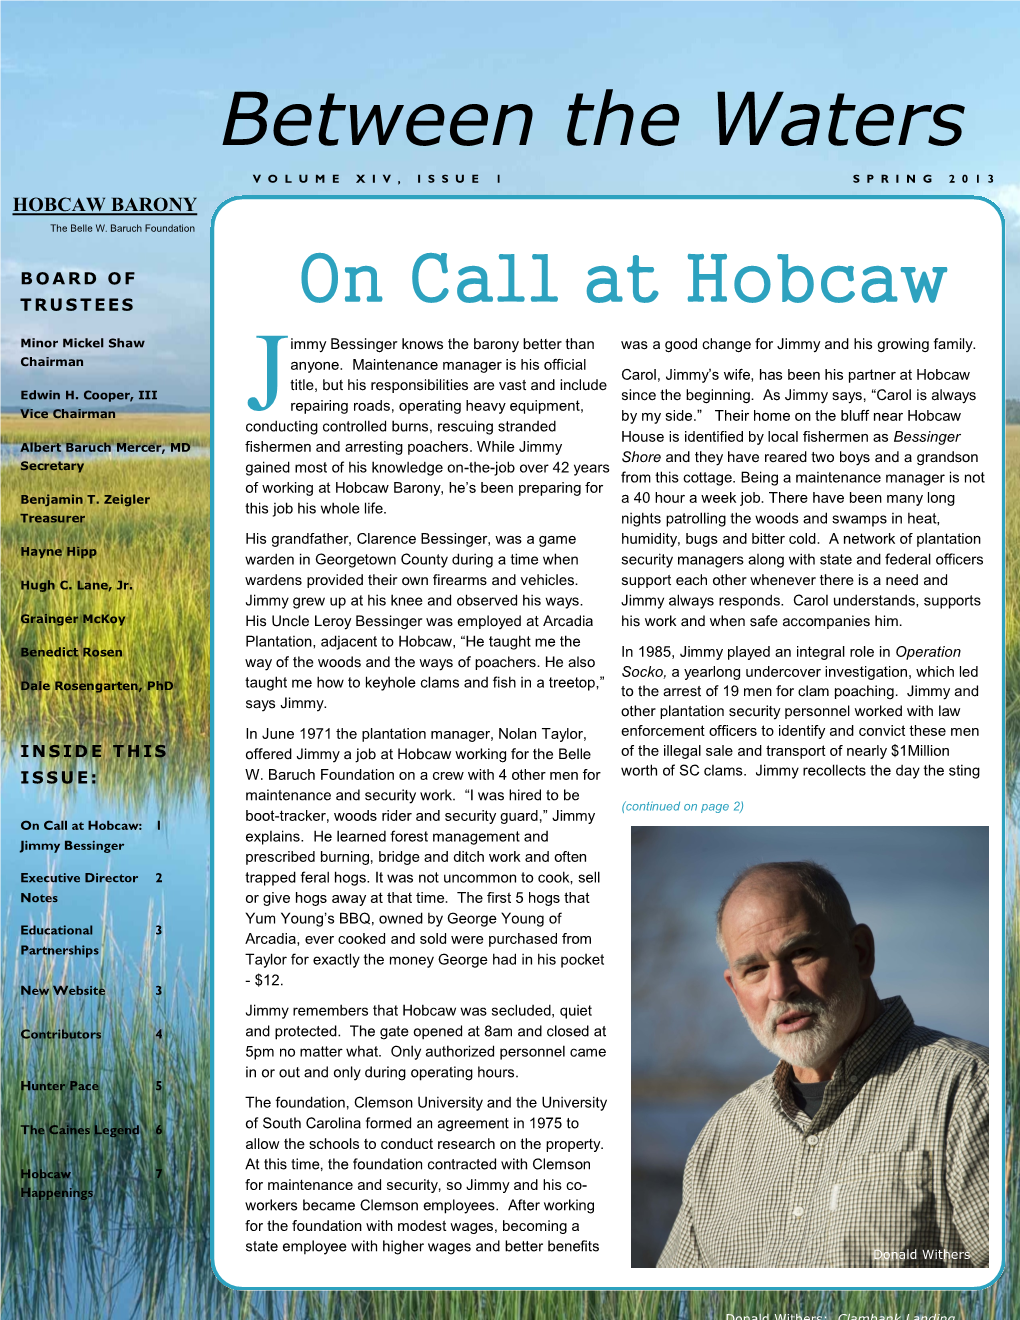 Between the Waters VOLUME XIV, ISSUE 1 SPRING 2013 HOBCAW BARONY the Belle W